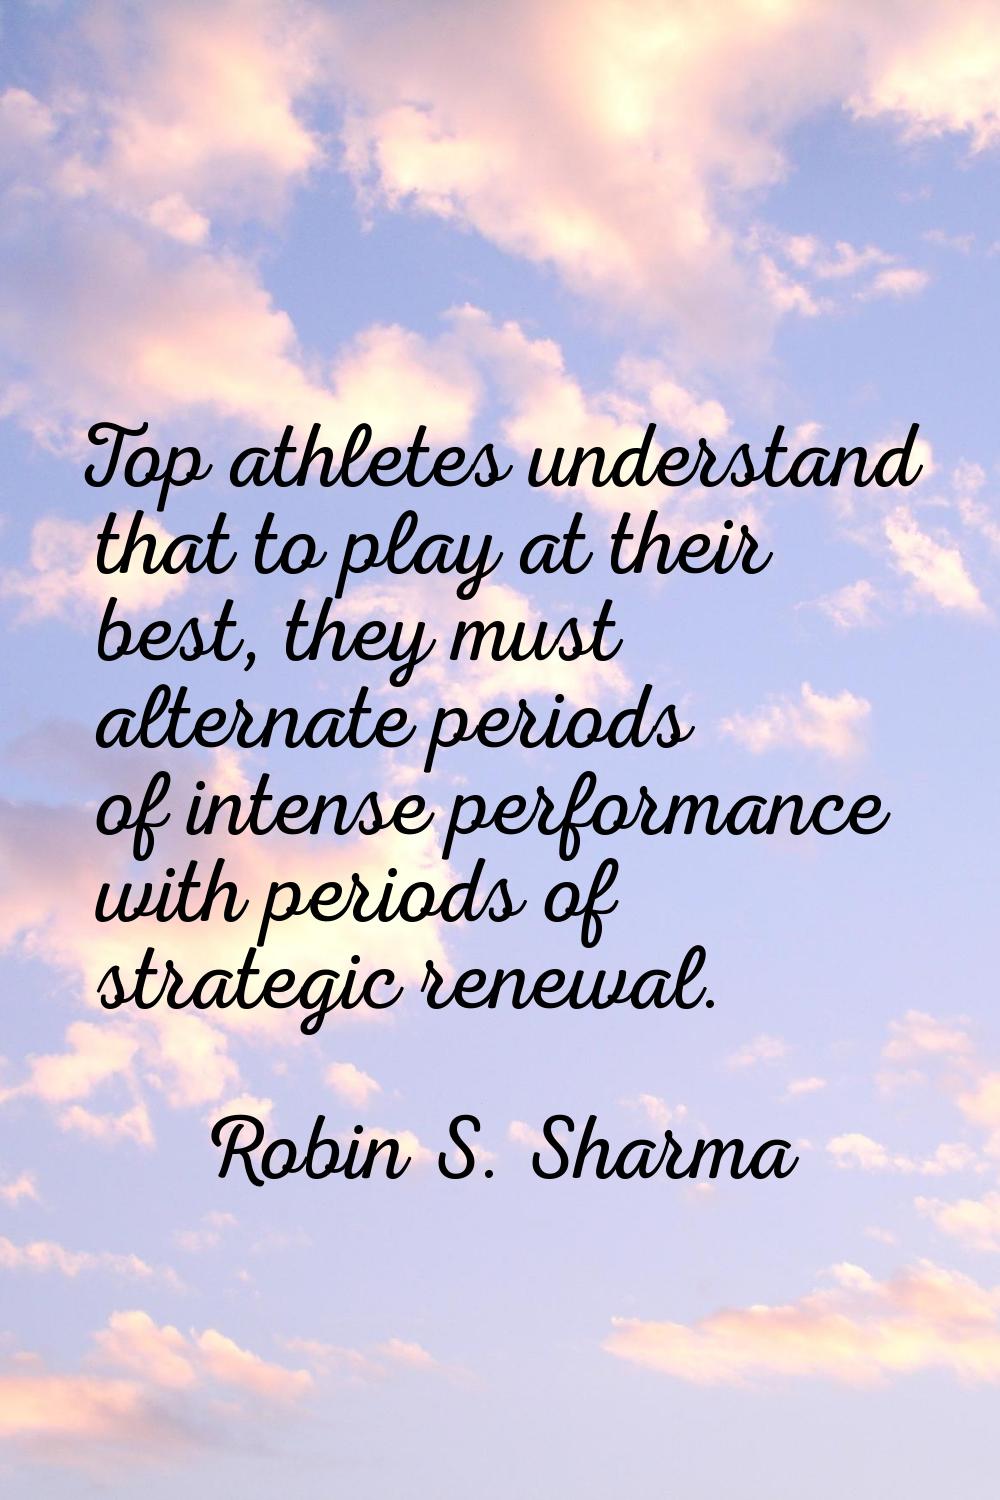 Top athletes understand that to play at their best, they must alternate periods of intense performa